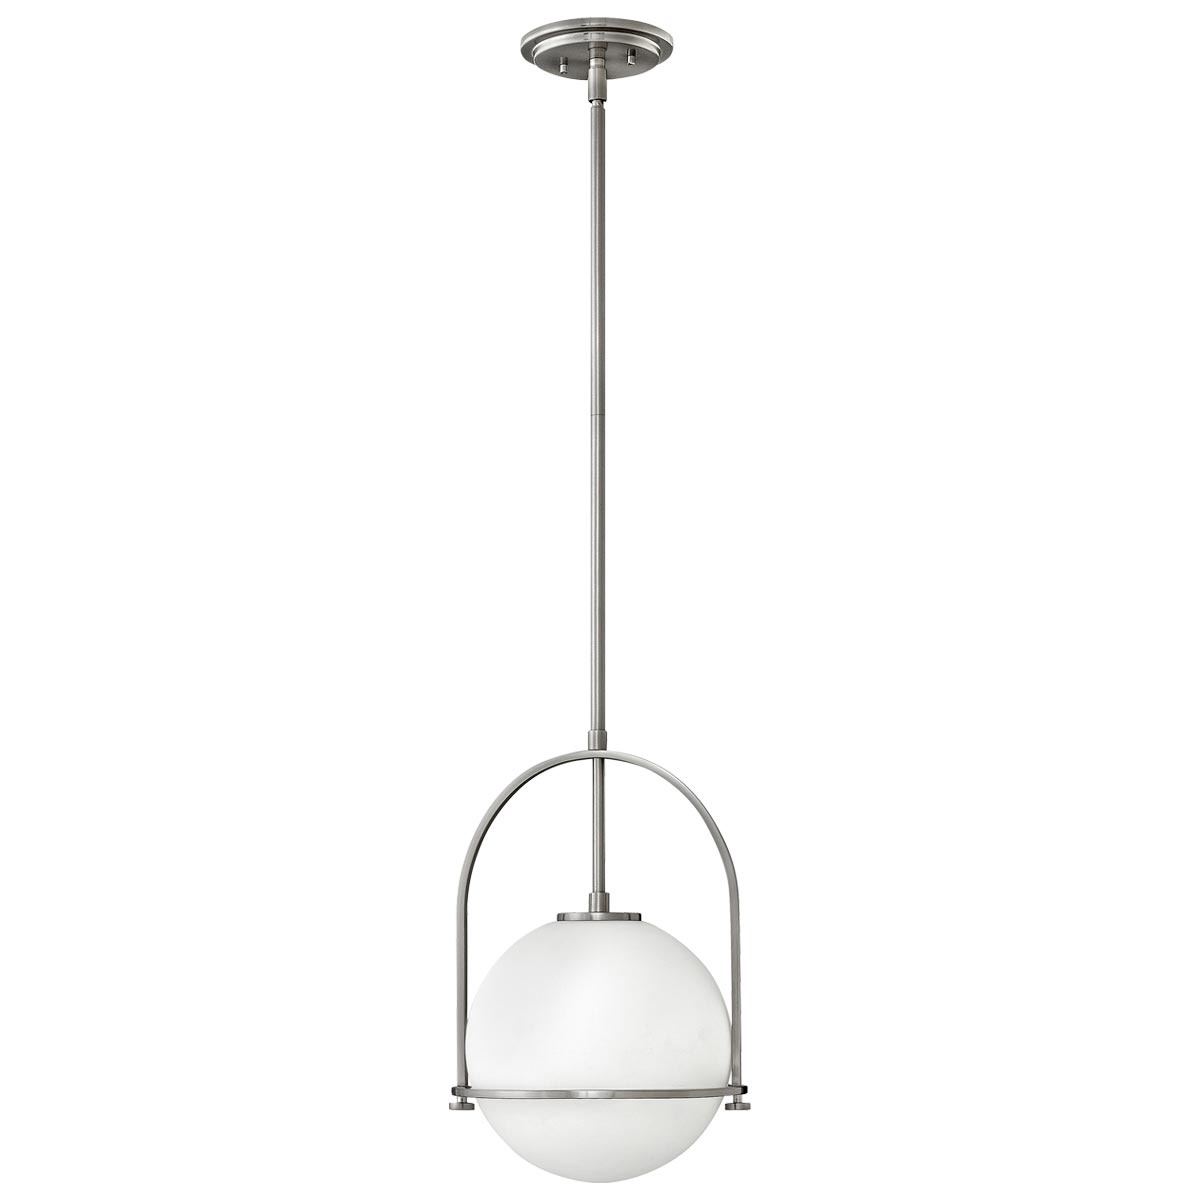 Quintiesse Somerset 1 Light Ceiling Pendant Brushed Nickel Opal Glass